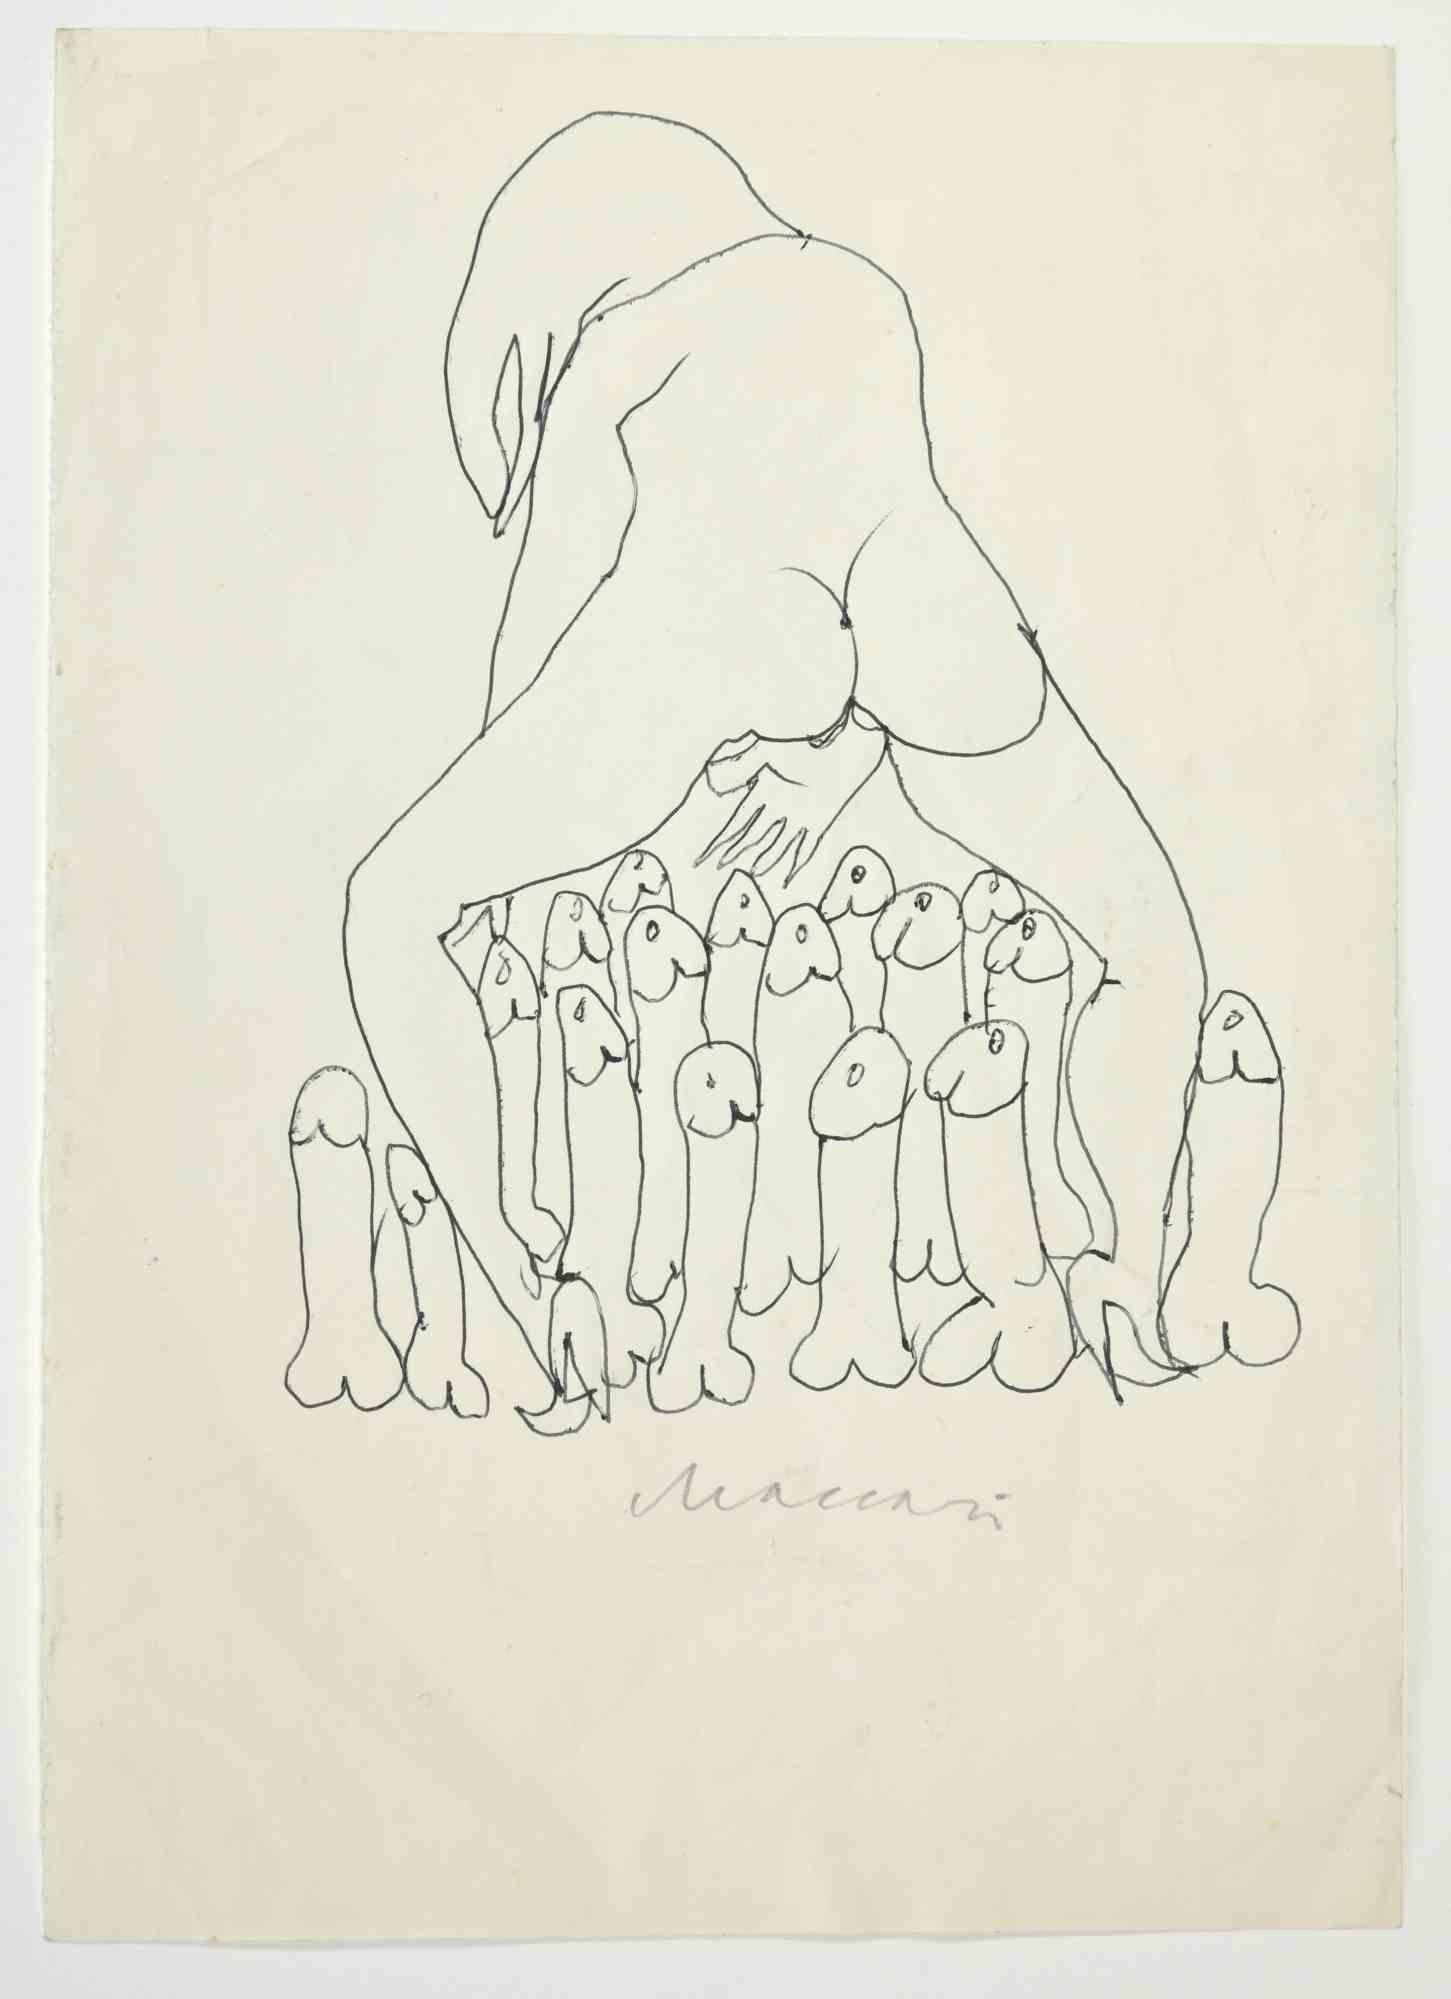 Erotic Scene is a pen Drawing realized by Mino Maccari  (1924-1989) in the 1970s.

Hand-signed on the lower, with another drawing on the rear.

Good condition.

Mino Maccari (Siena, 1924-Rome, June 16, 1989) was an Italian writer, painter, engraver